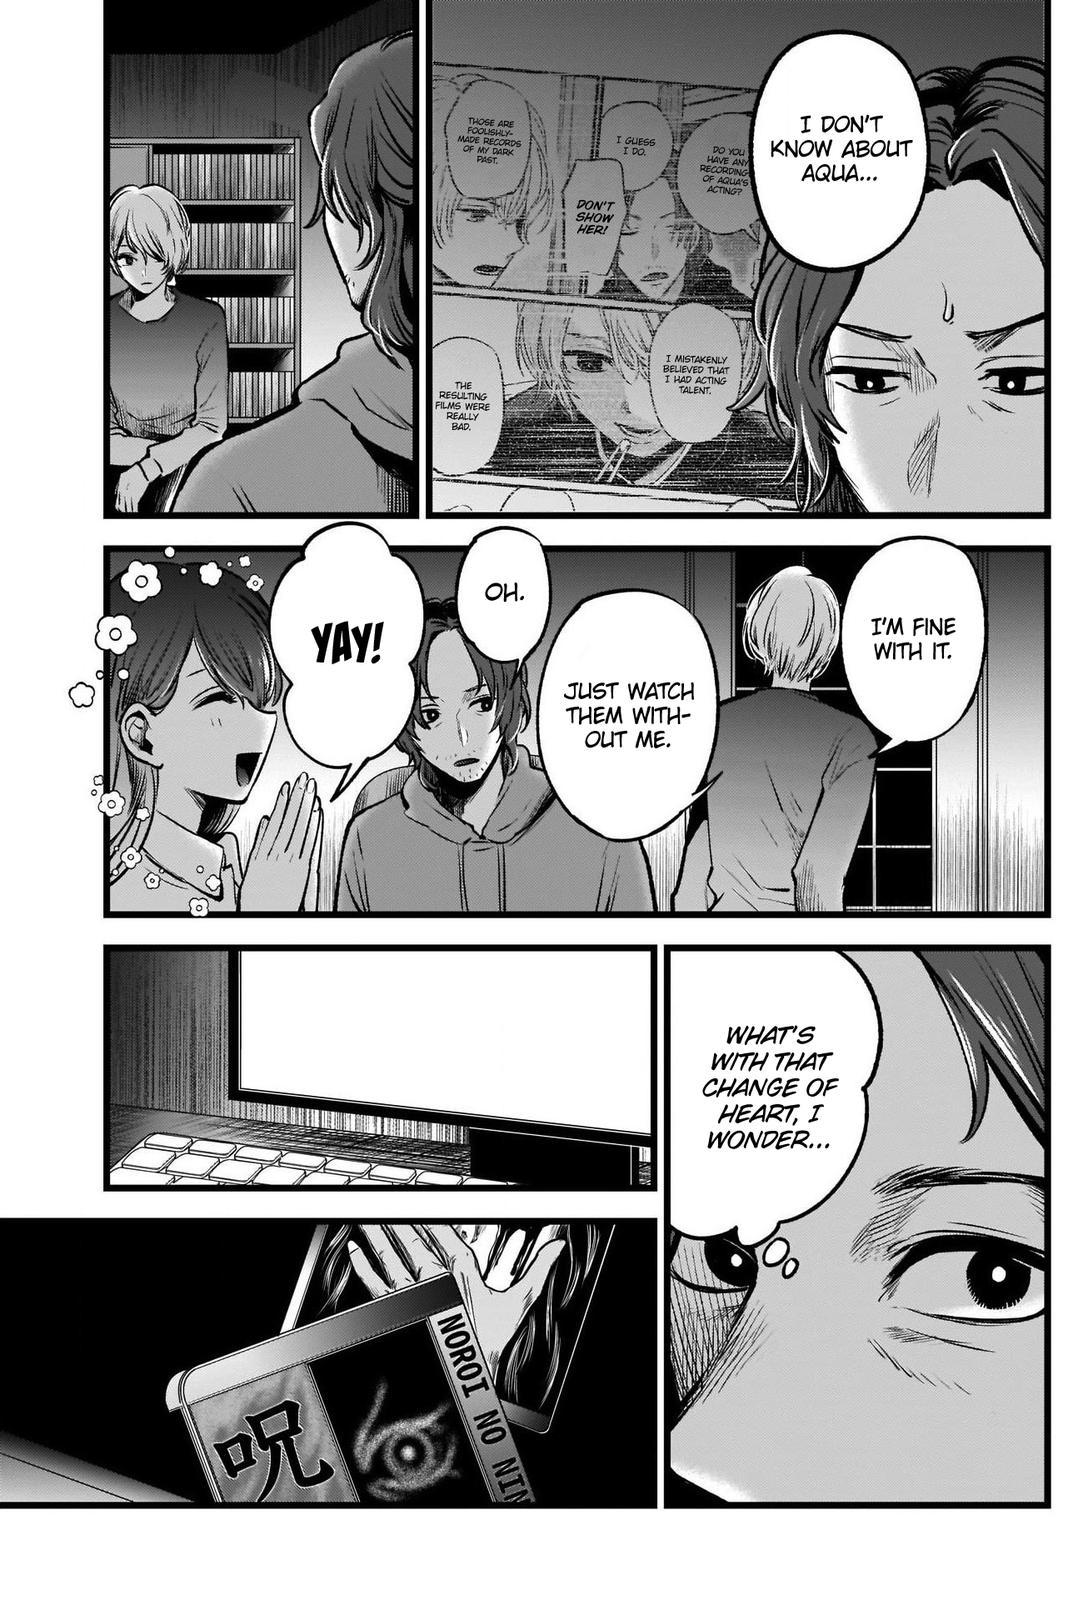 I Can Copy Talents Ch.55 Page 2 - Mangago